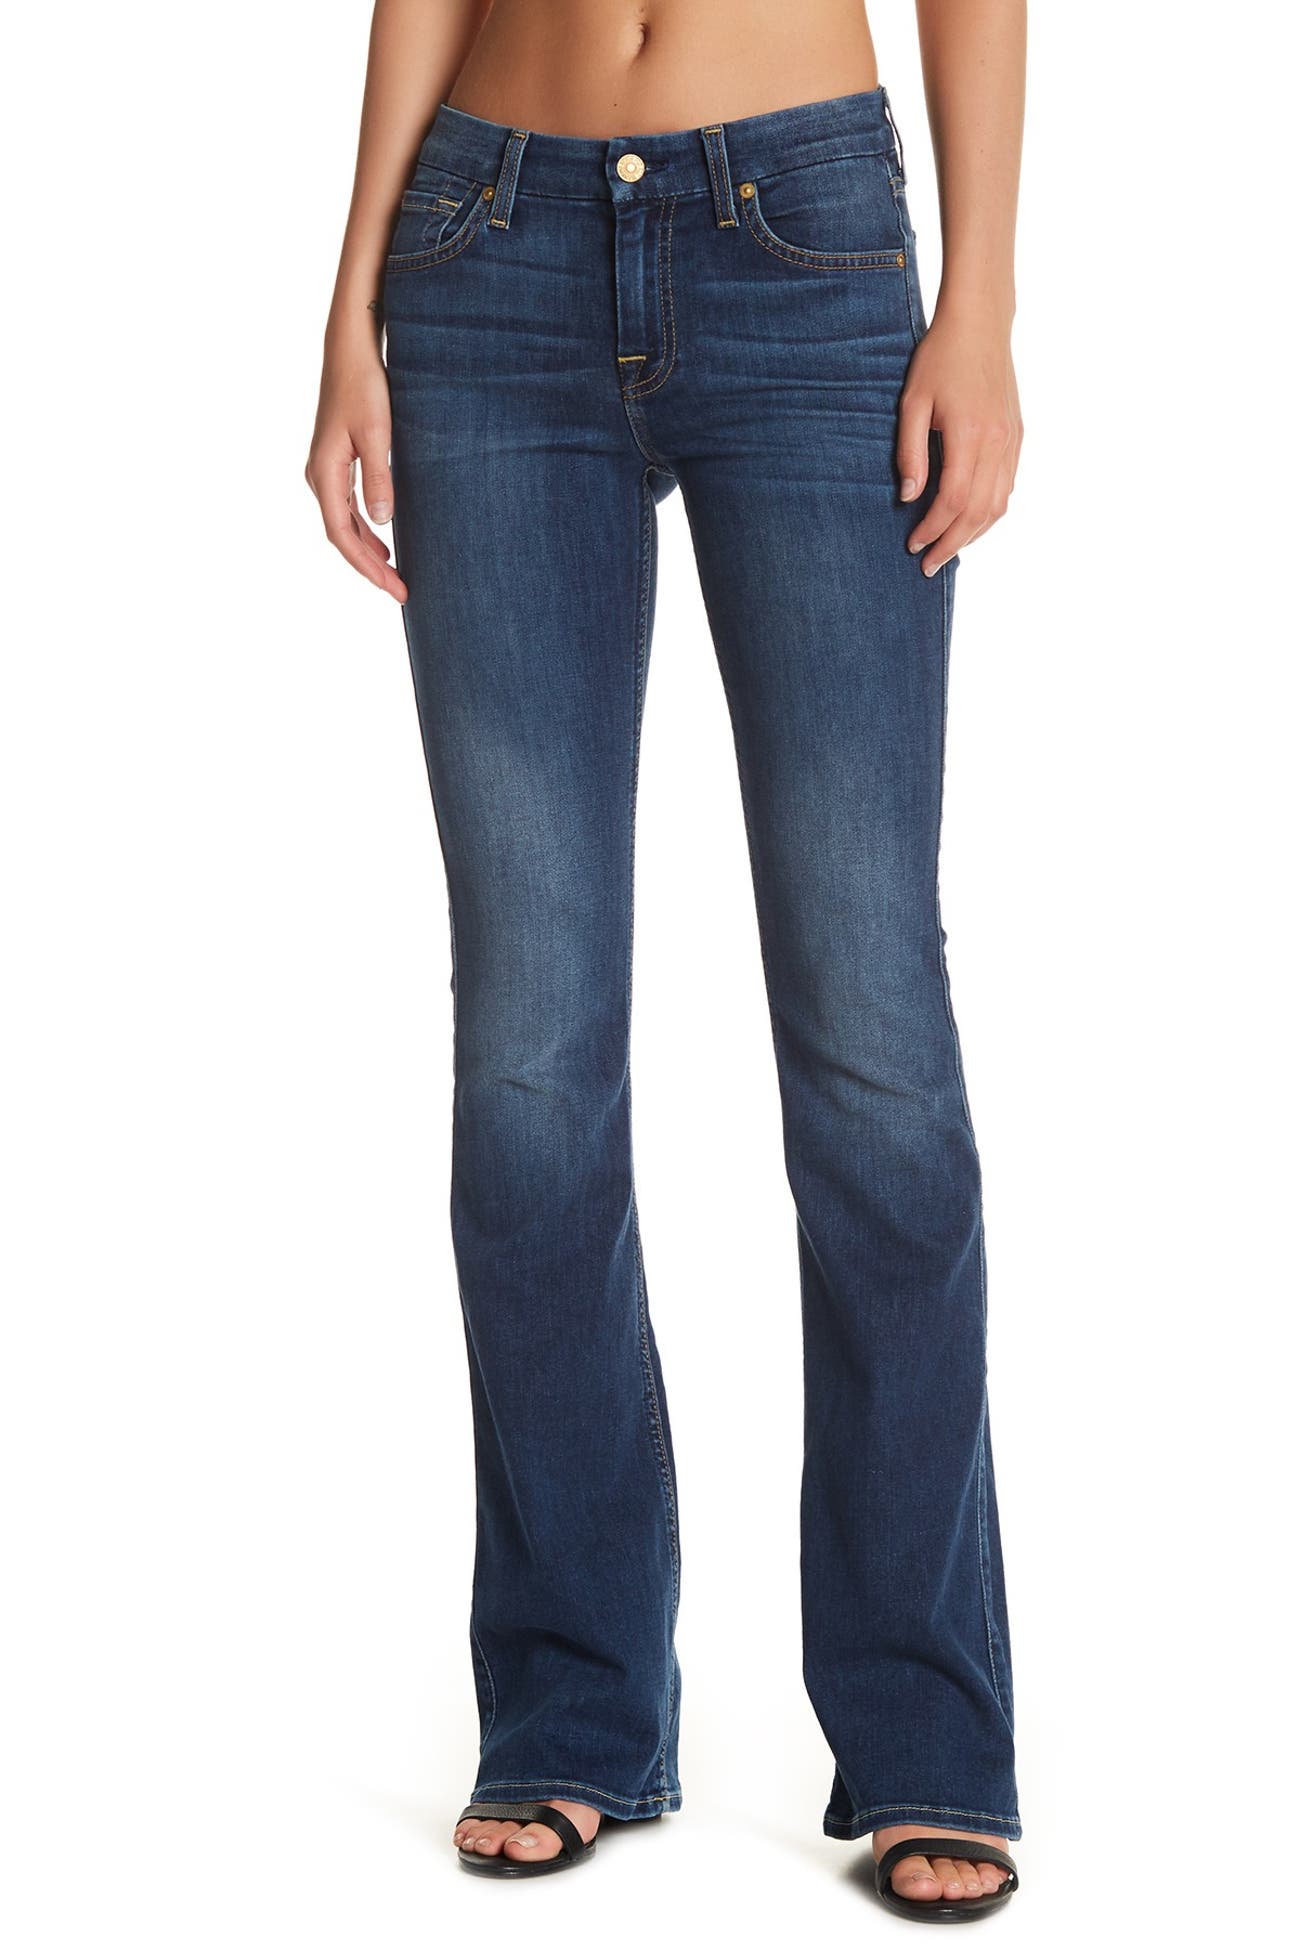 7 For All Mankind | Bootcut Flare Jeans | Nordstrom Rack